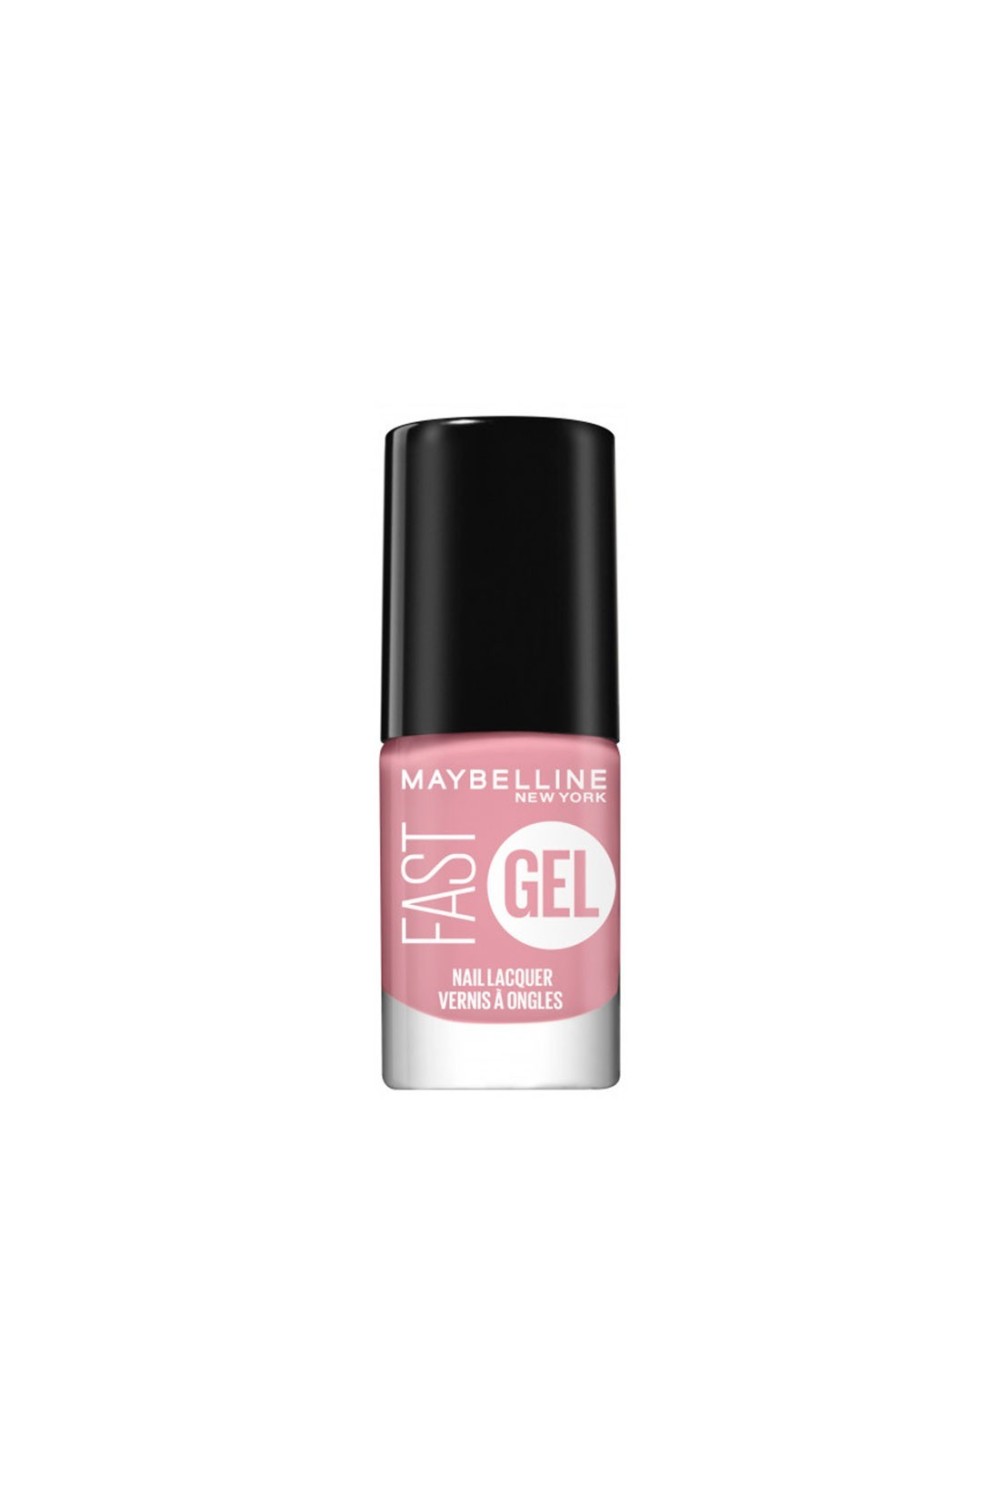 Maybelline Fast Gel Nail Lacquer 02-Ballerina